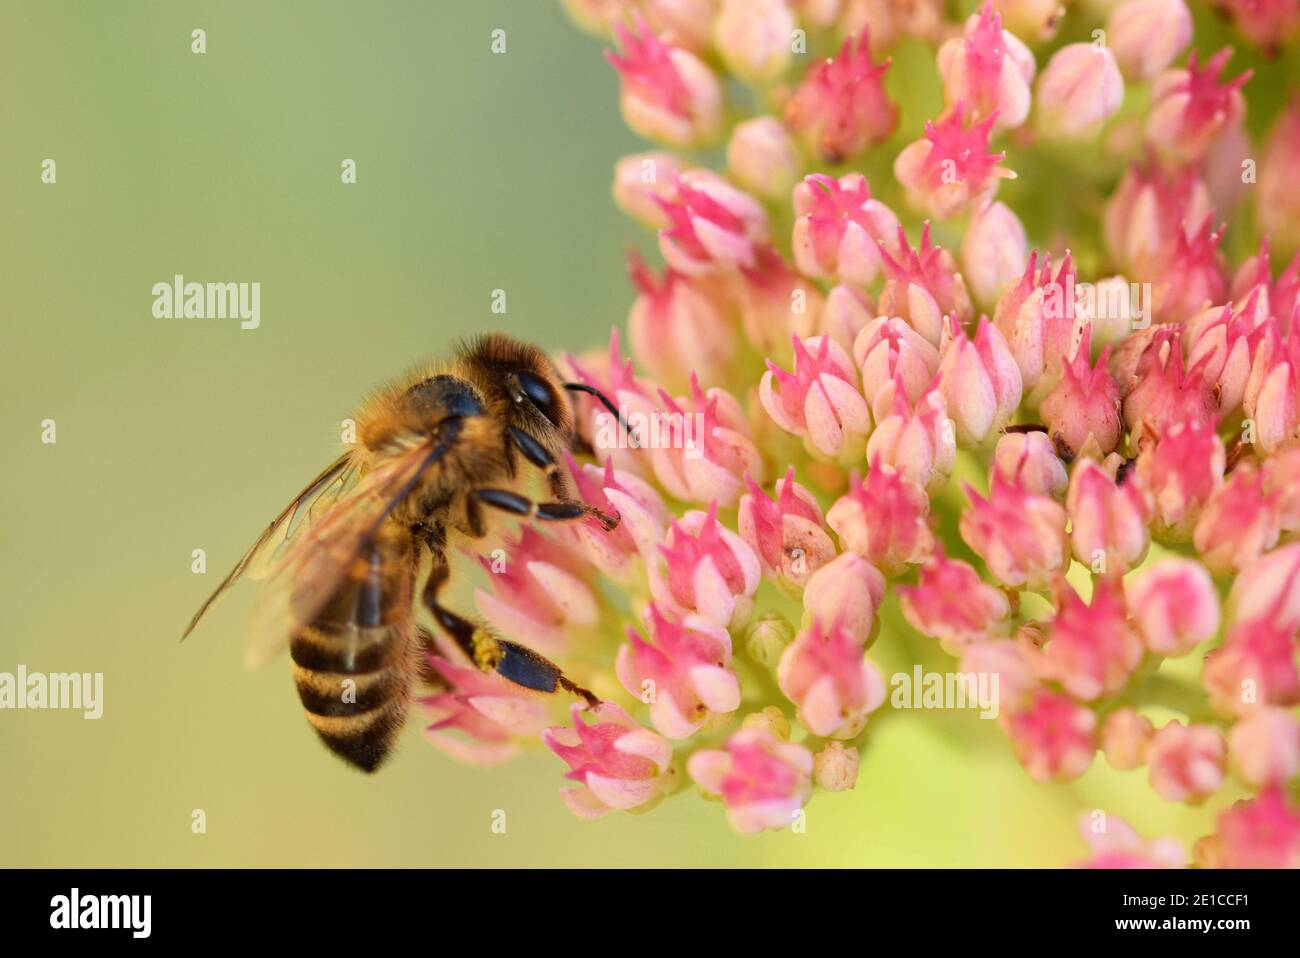 Honey Bee collecting pollen from flowers, England, UK Stock Photo